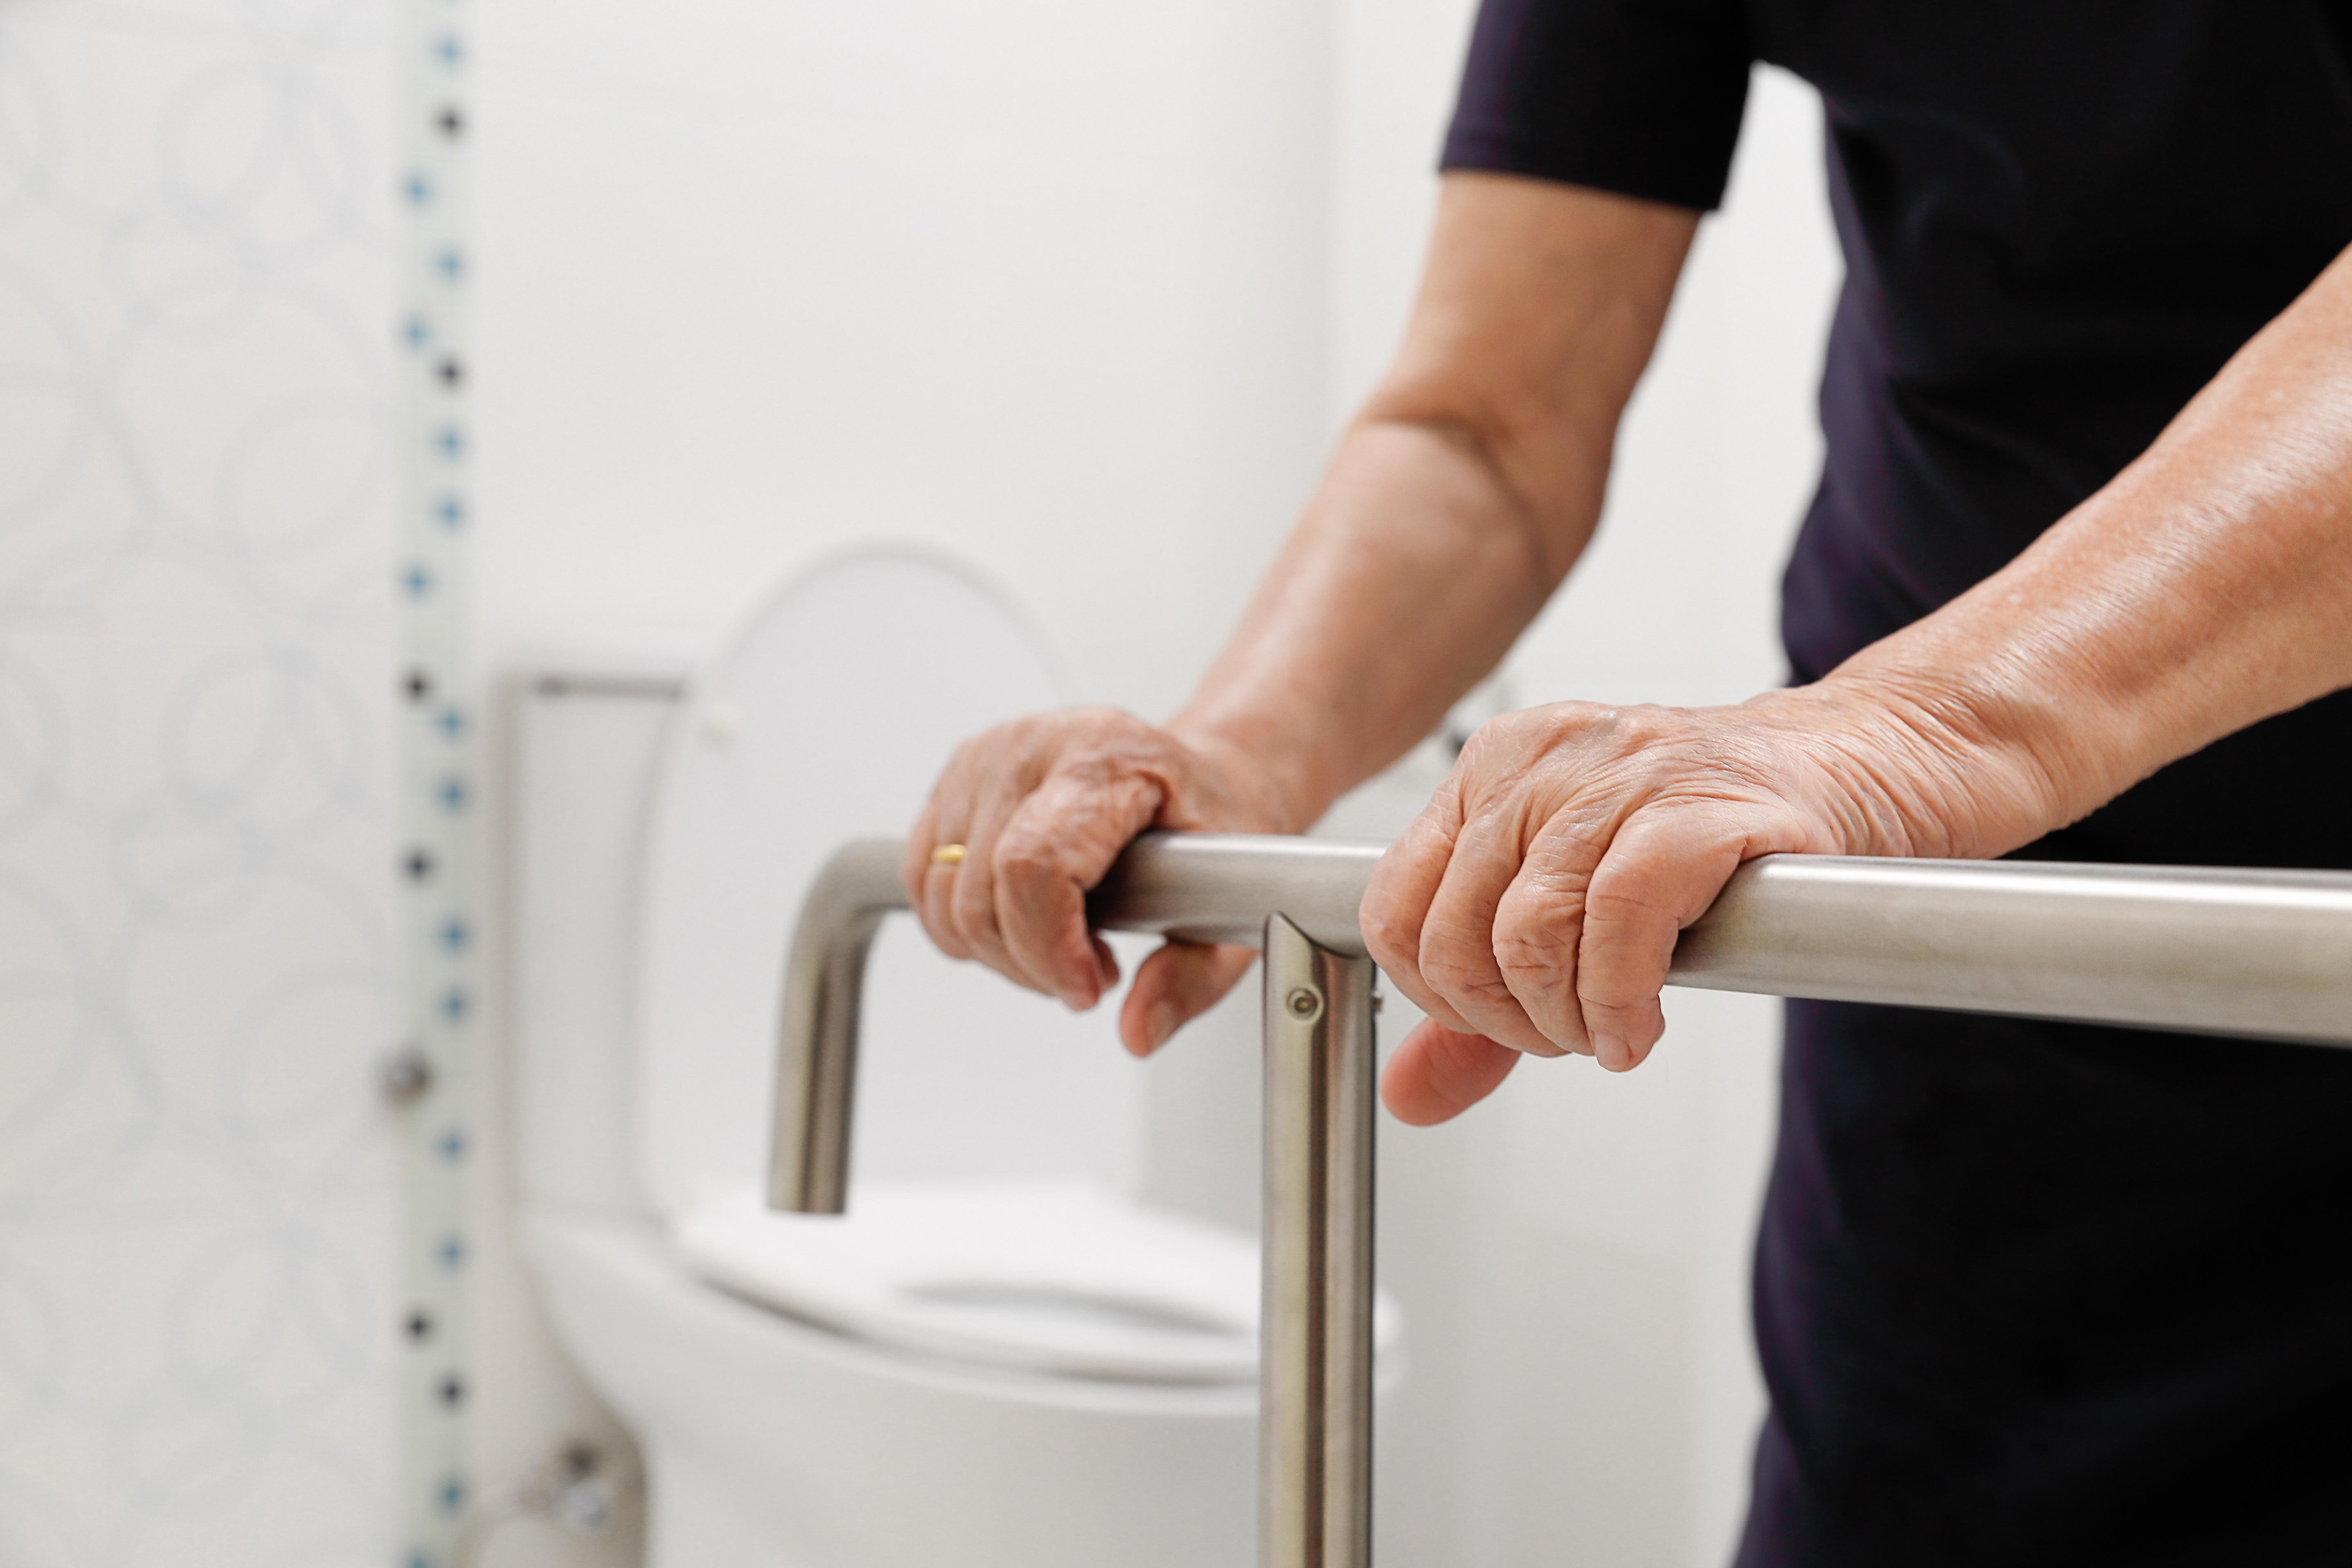 How to Use a Toilet After Hip Replacement - EquipMeOT